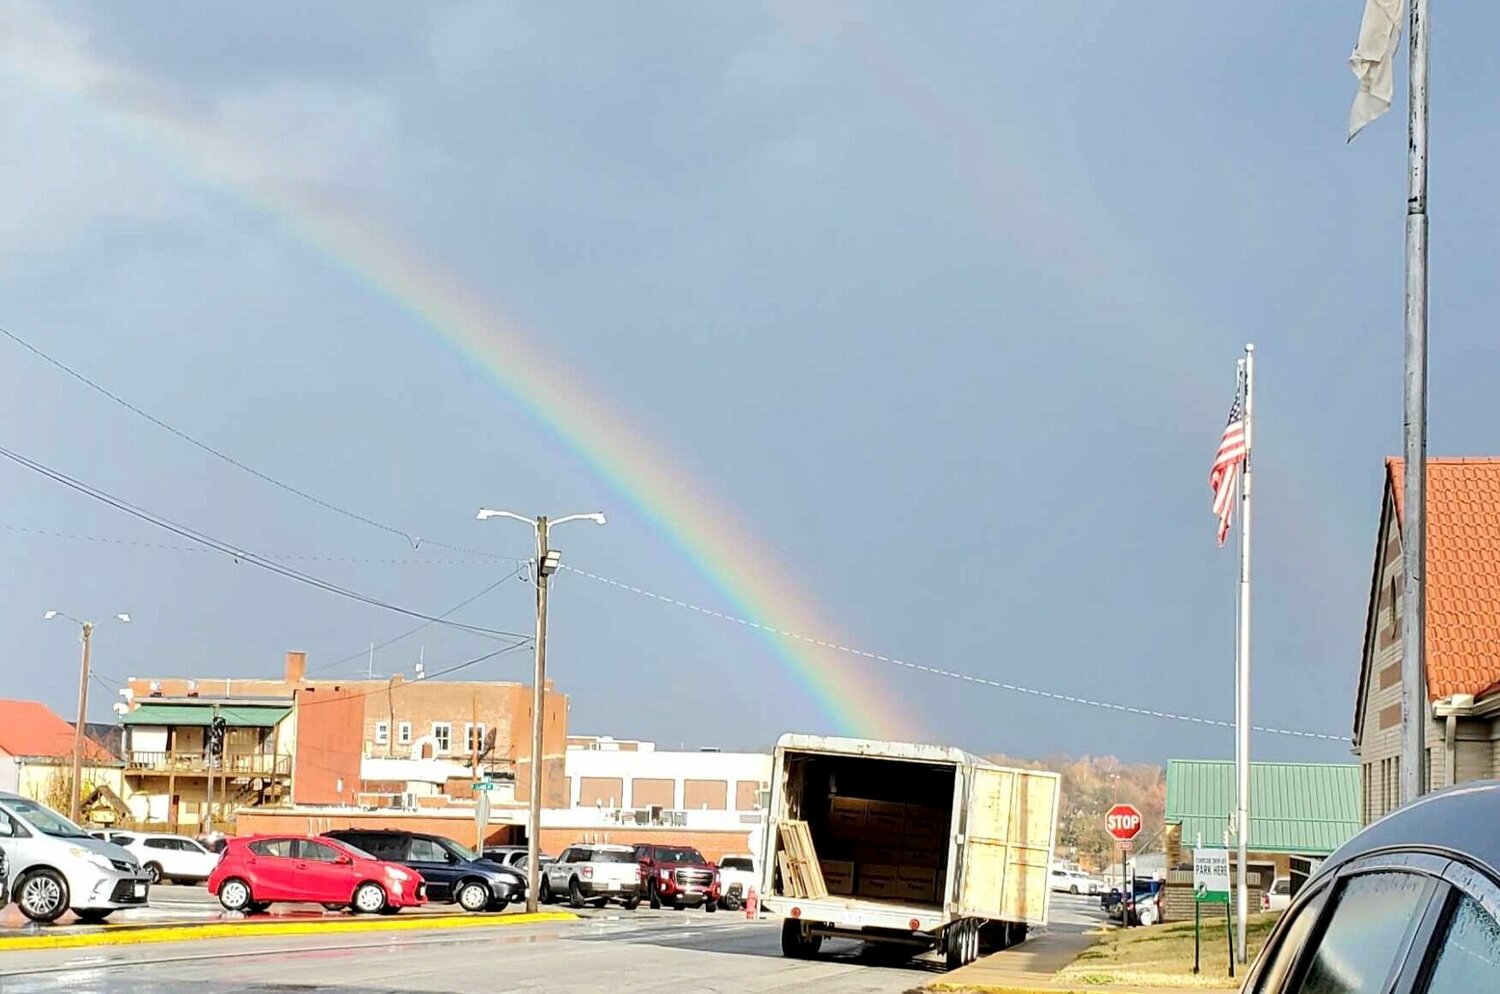 A double rainbow graced the sky on the last day of Operation Christmas Child shoebox collections as volunteers loaded the boxes into trucks to be shipped out. Volunteer Drop-Off Team Leader Lesa Rothgeb with First Baptist Church said, “The rain stopped and a beautiful double rainbow came out! The first bright bow seemed to arch its way into the trailer where the shoeboxes were and then the fainter one landed over the church! God seemed to be saying, ‘Well done, West Plains!’”